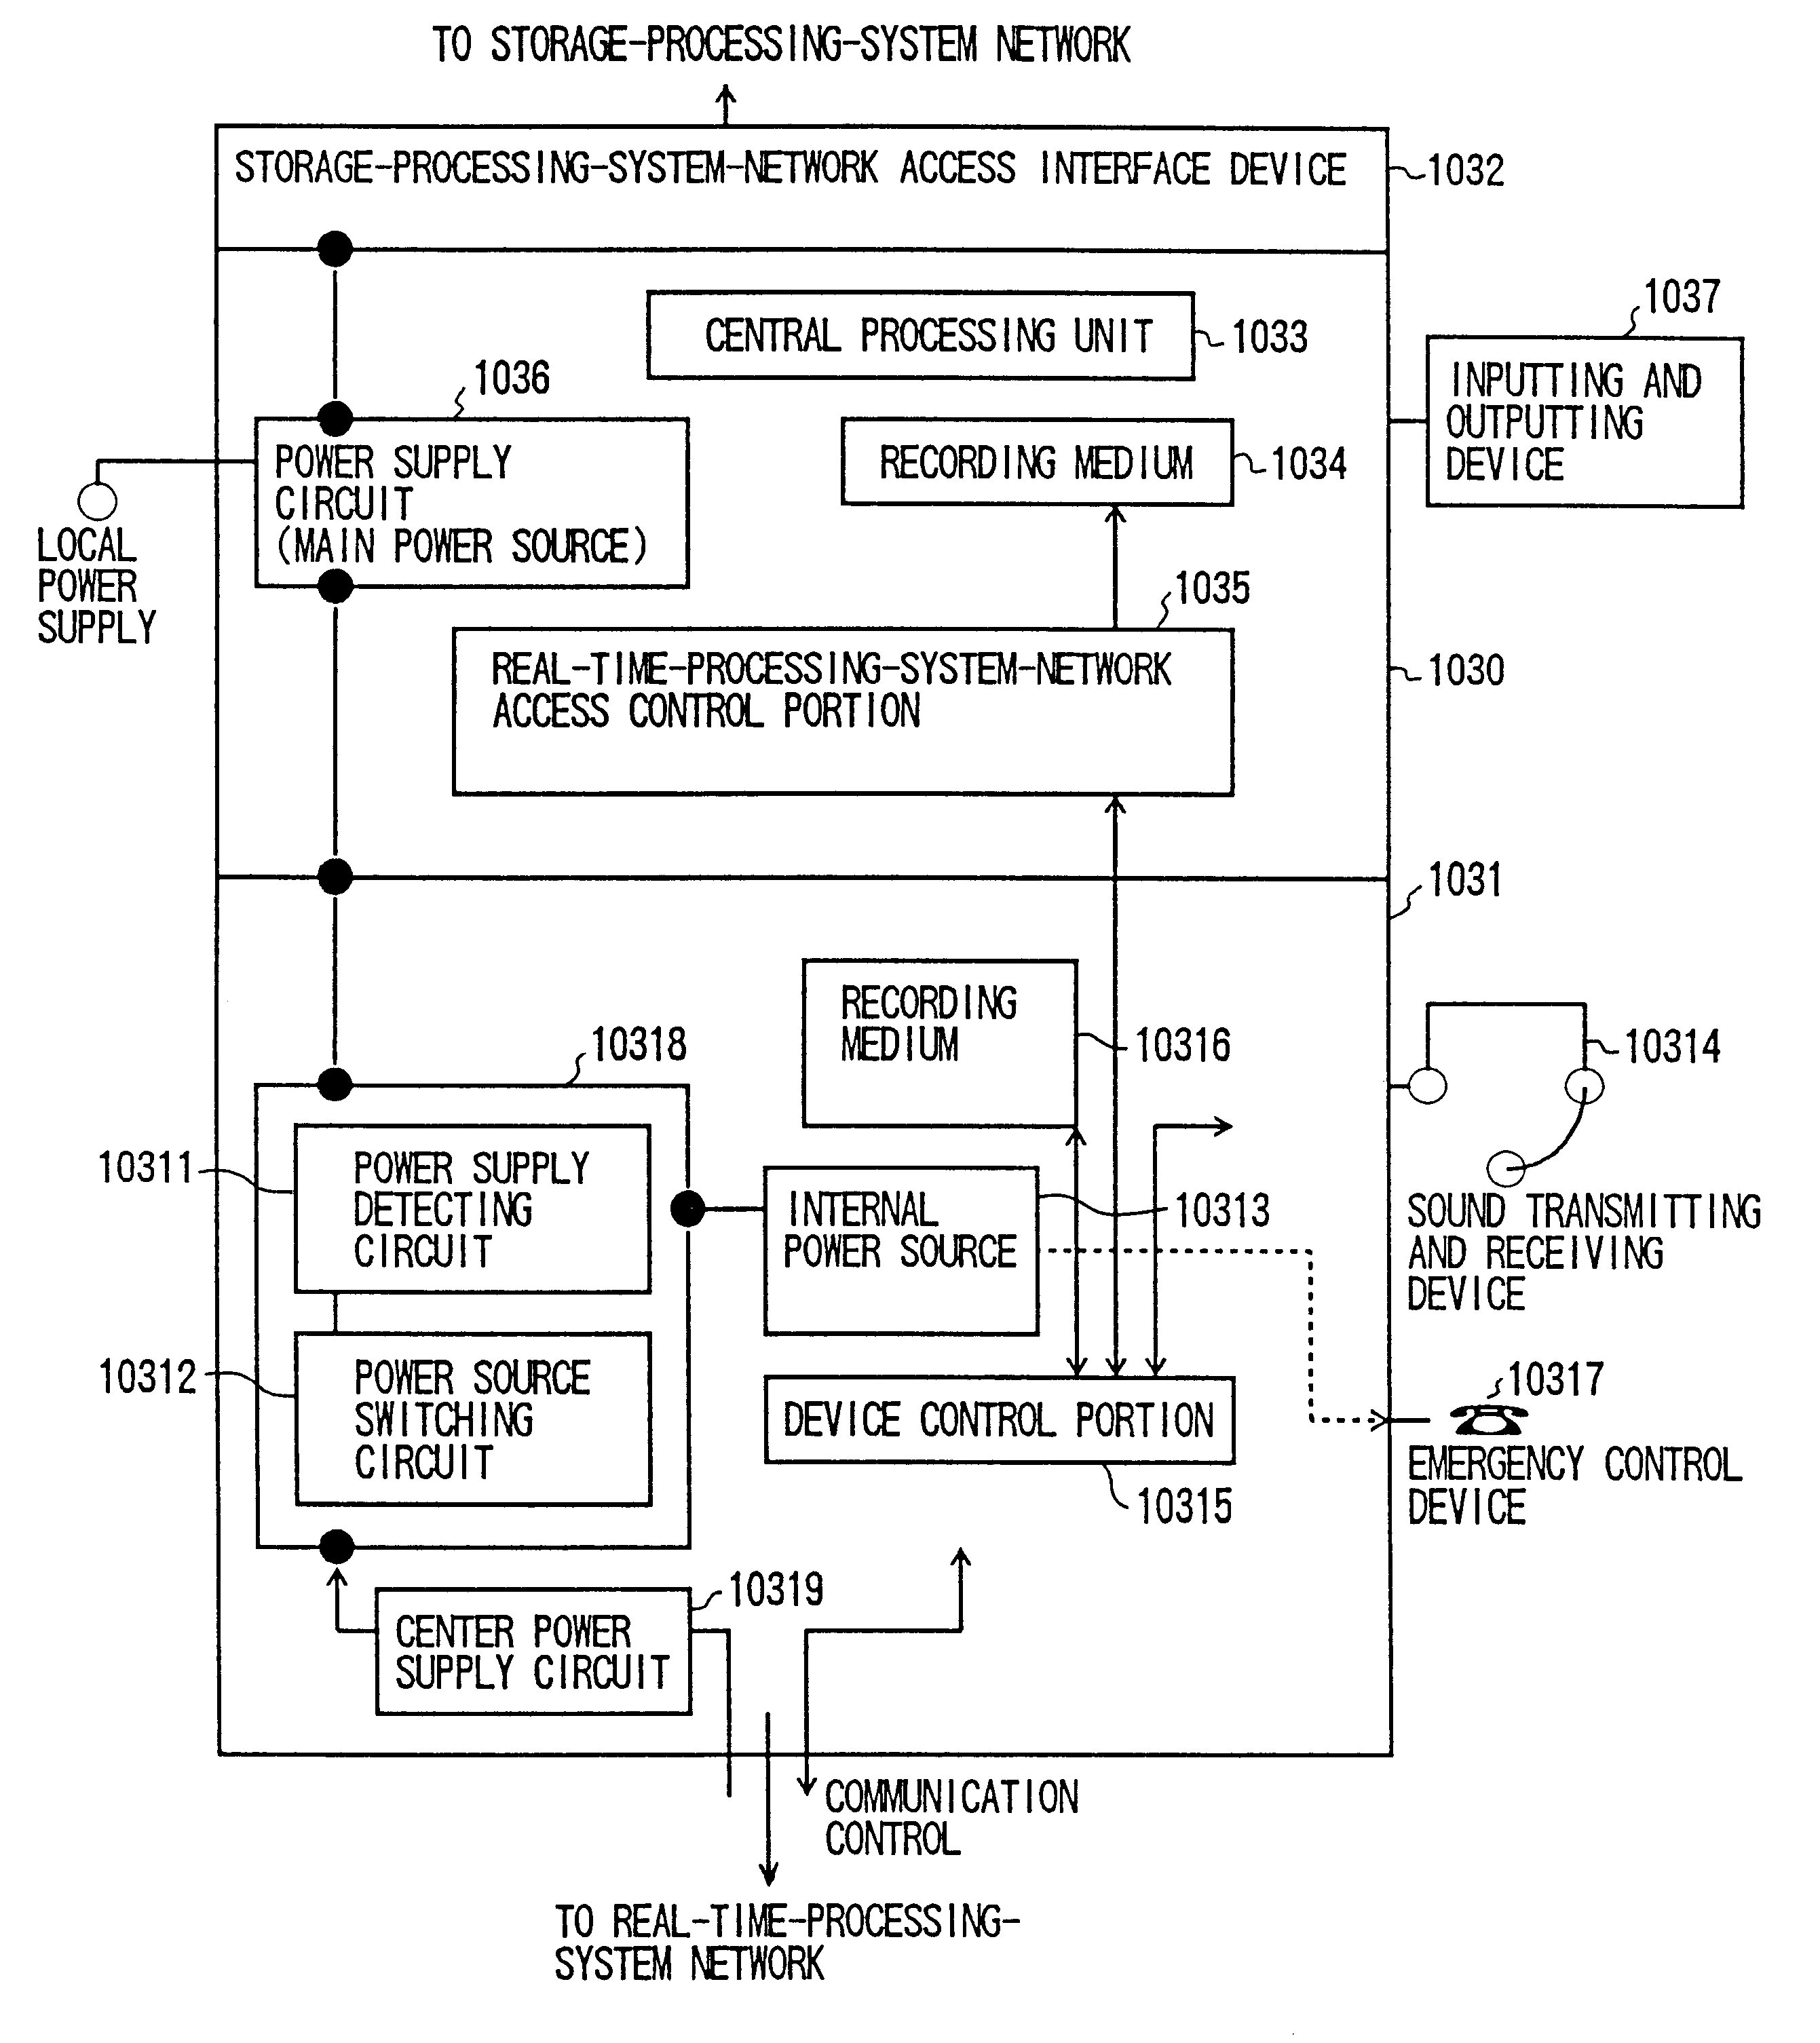 Communication-terminal management system with storage-processing-system network and real-time-processing-system network and a communication terminal for these networks